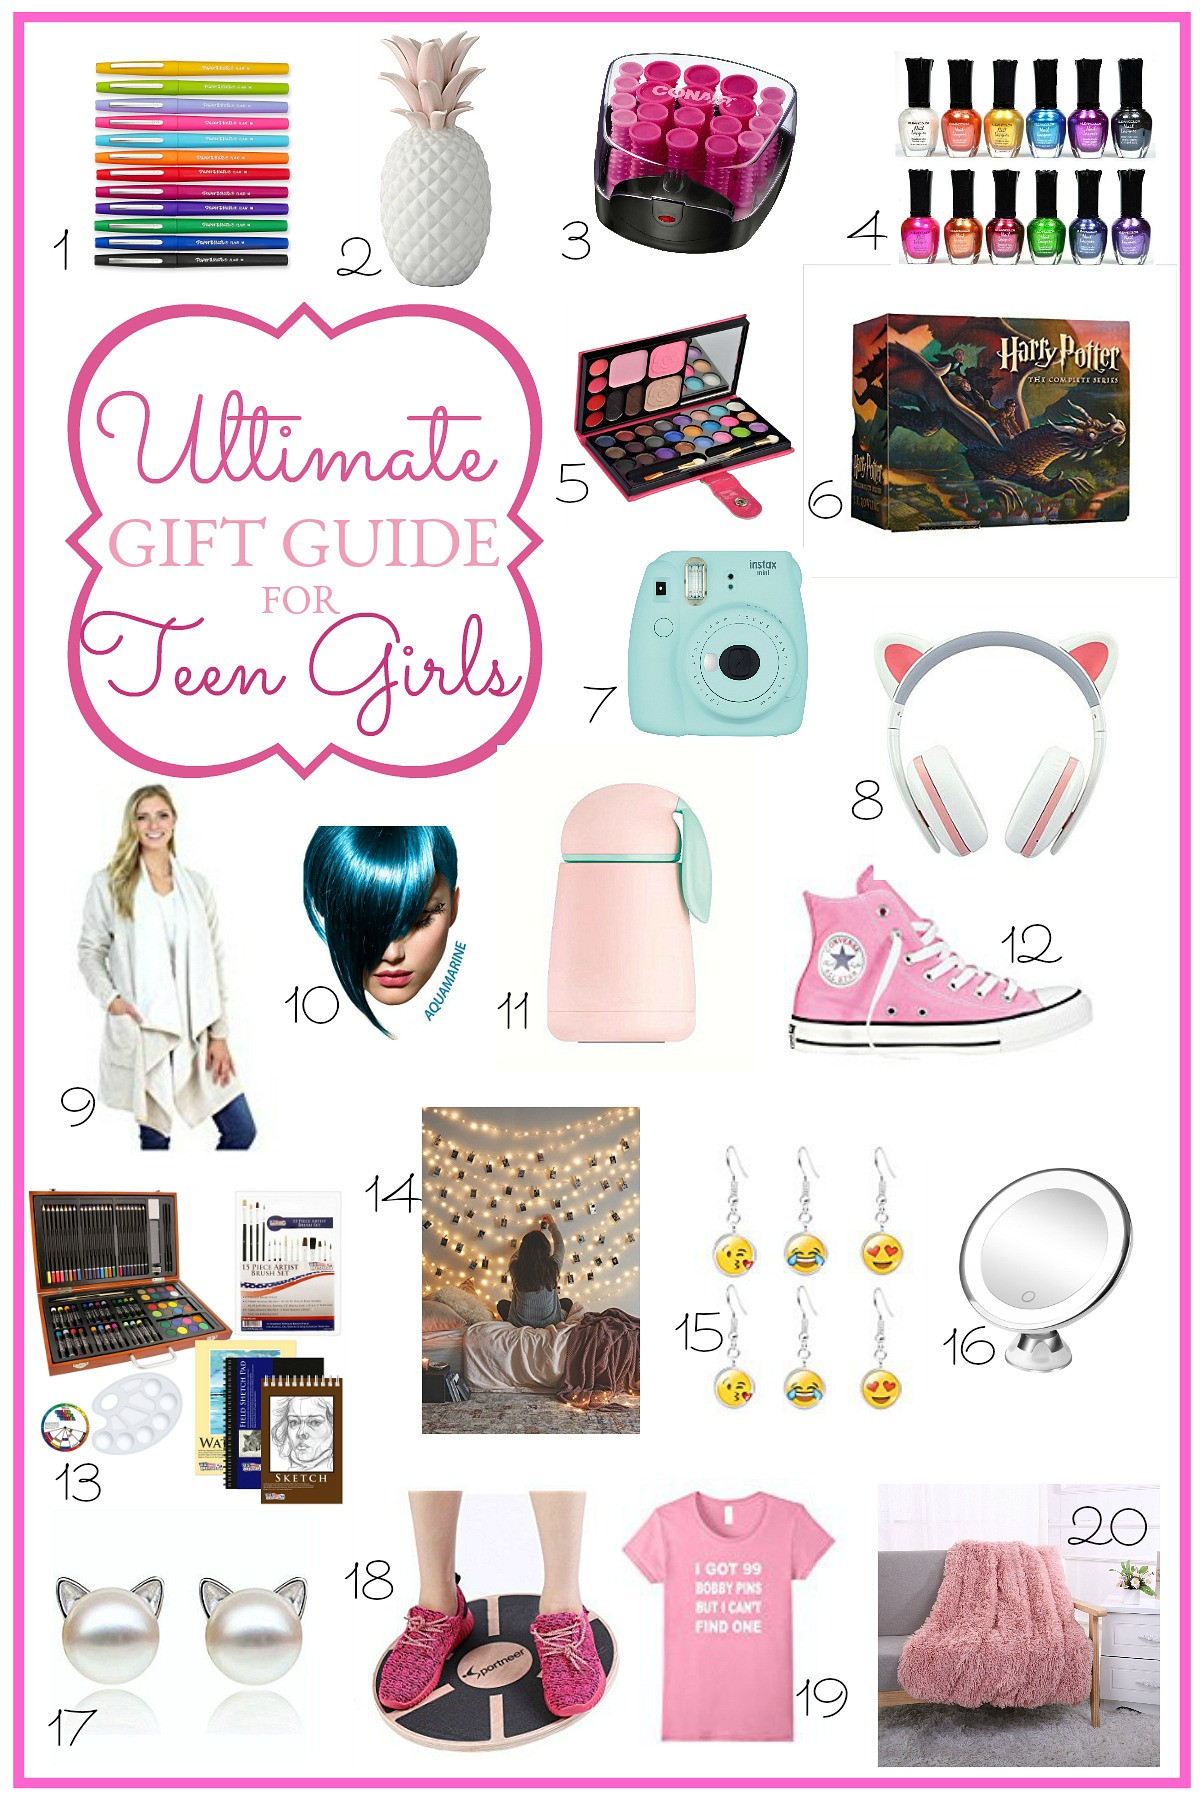 Gift Ideas Teen Girls
 Ultimate Holiday Gift Guide for Teen Girls